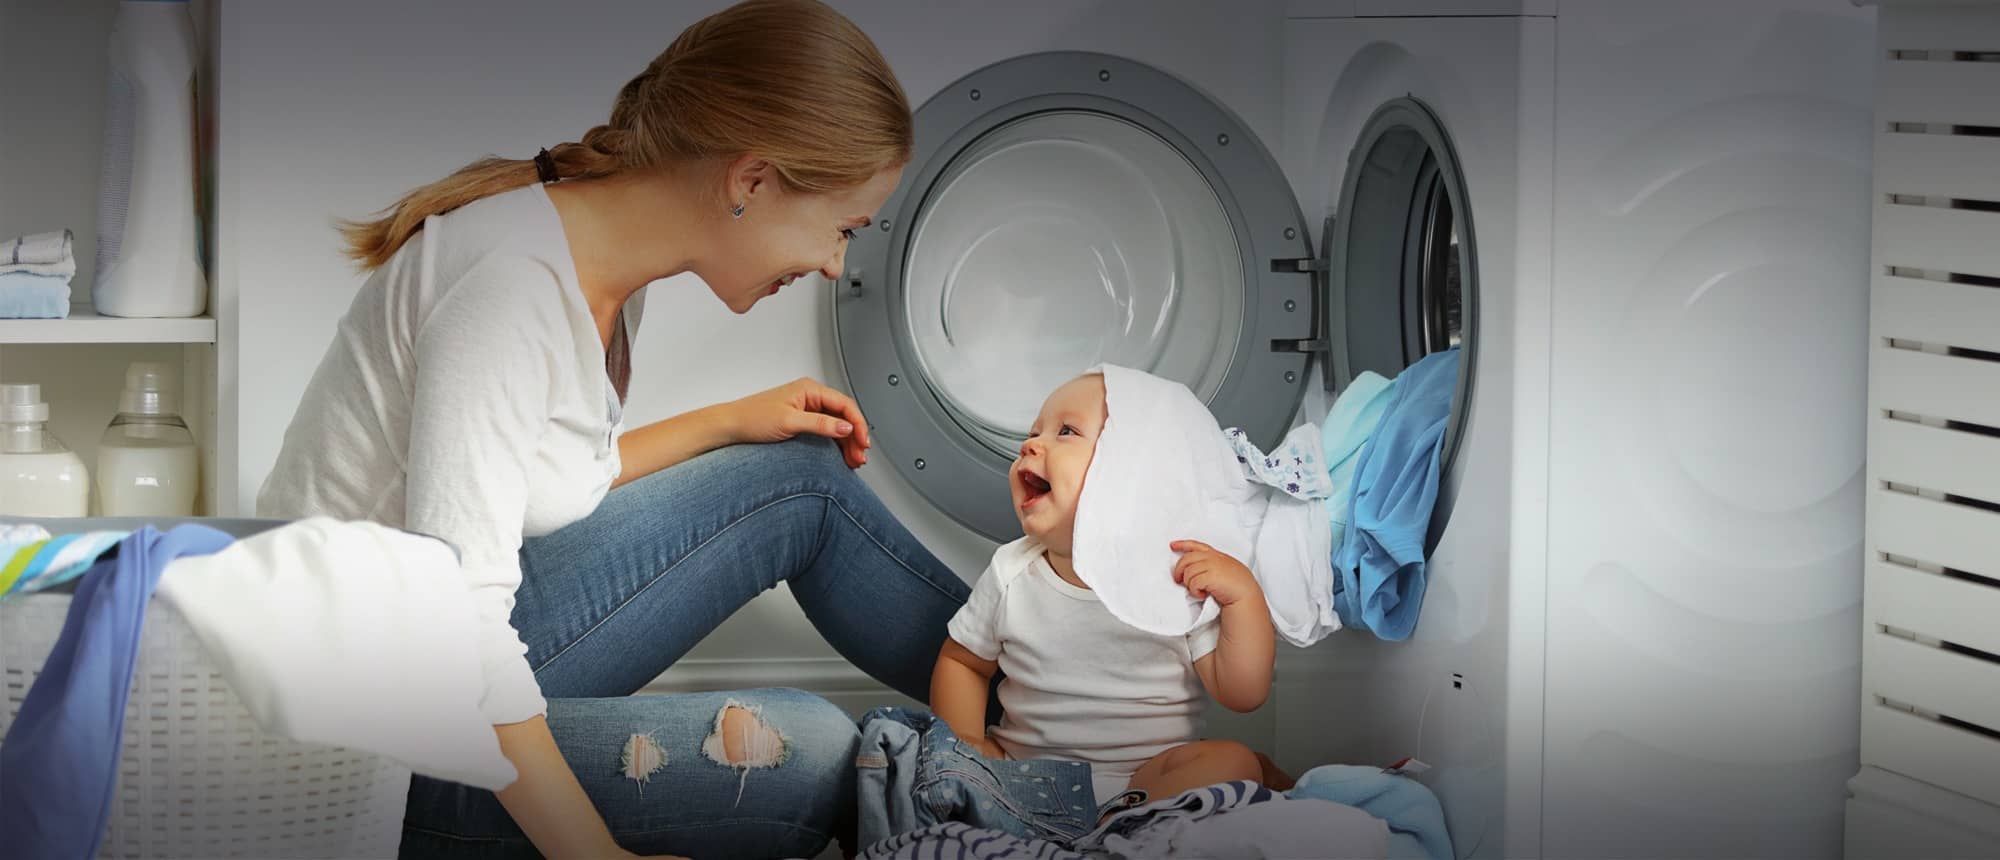 Nanny washing while looking after baby